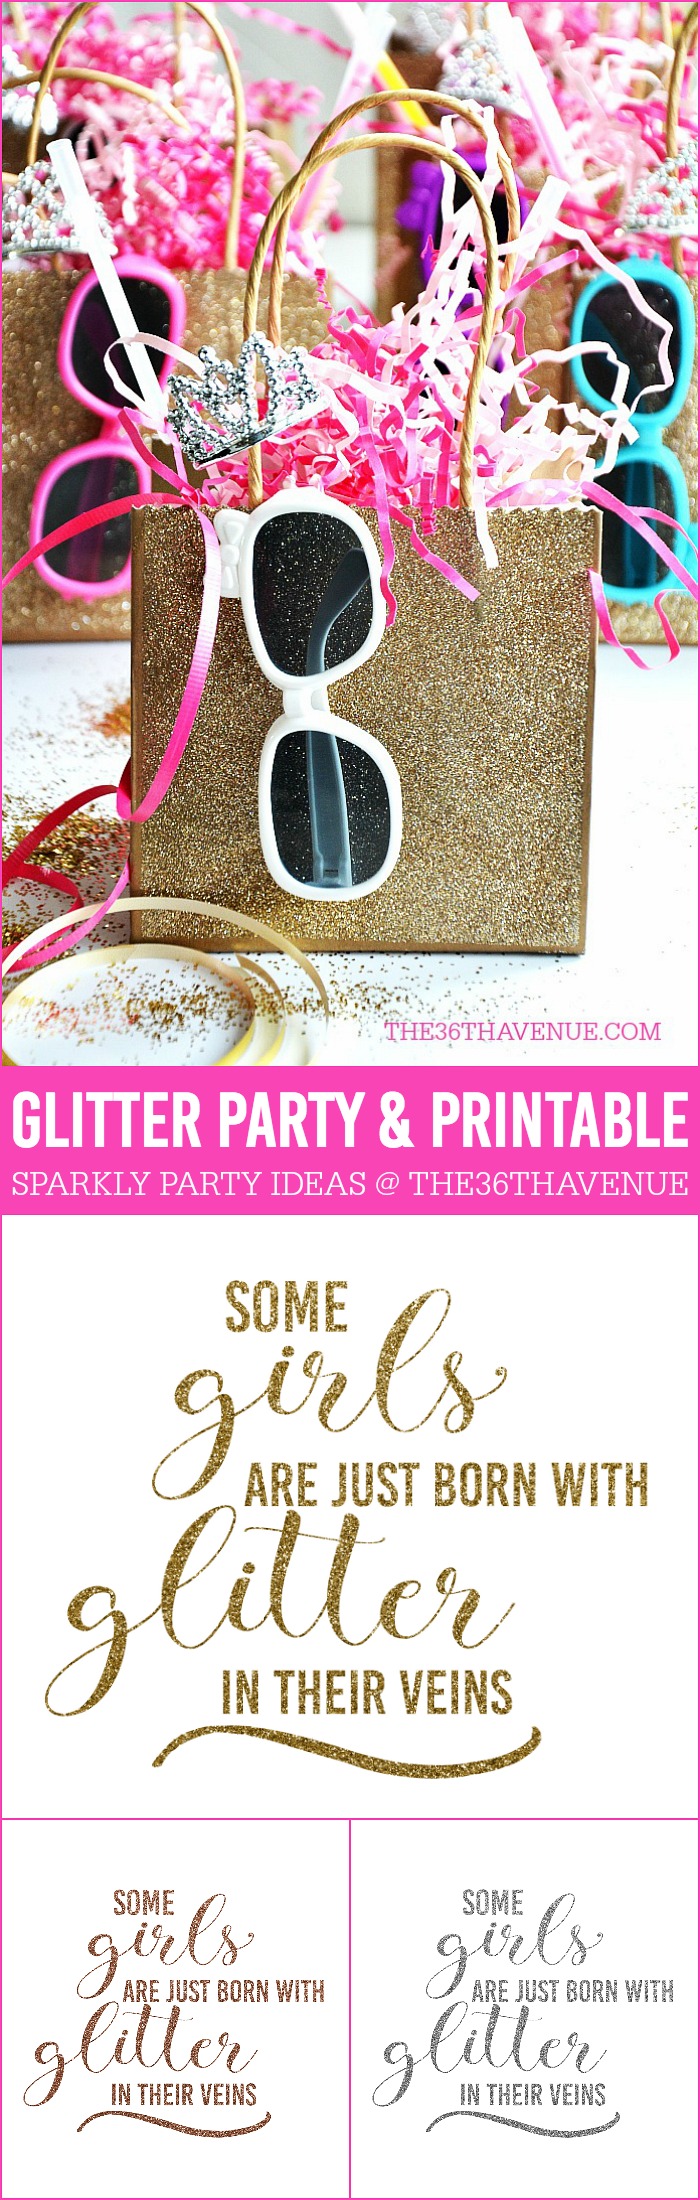 Glitter Party Ideas - These cute ideas are perfect for birthday parties!